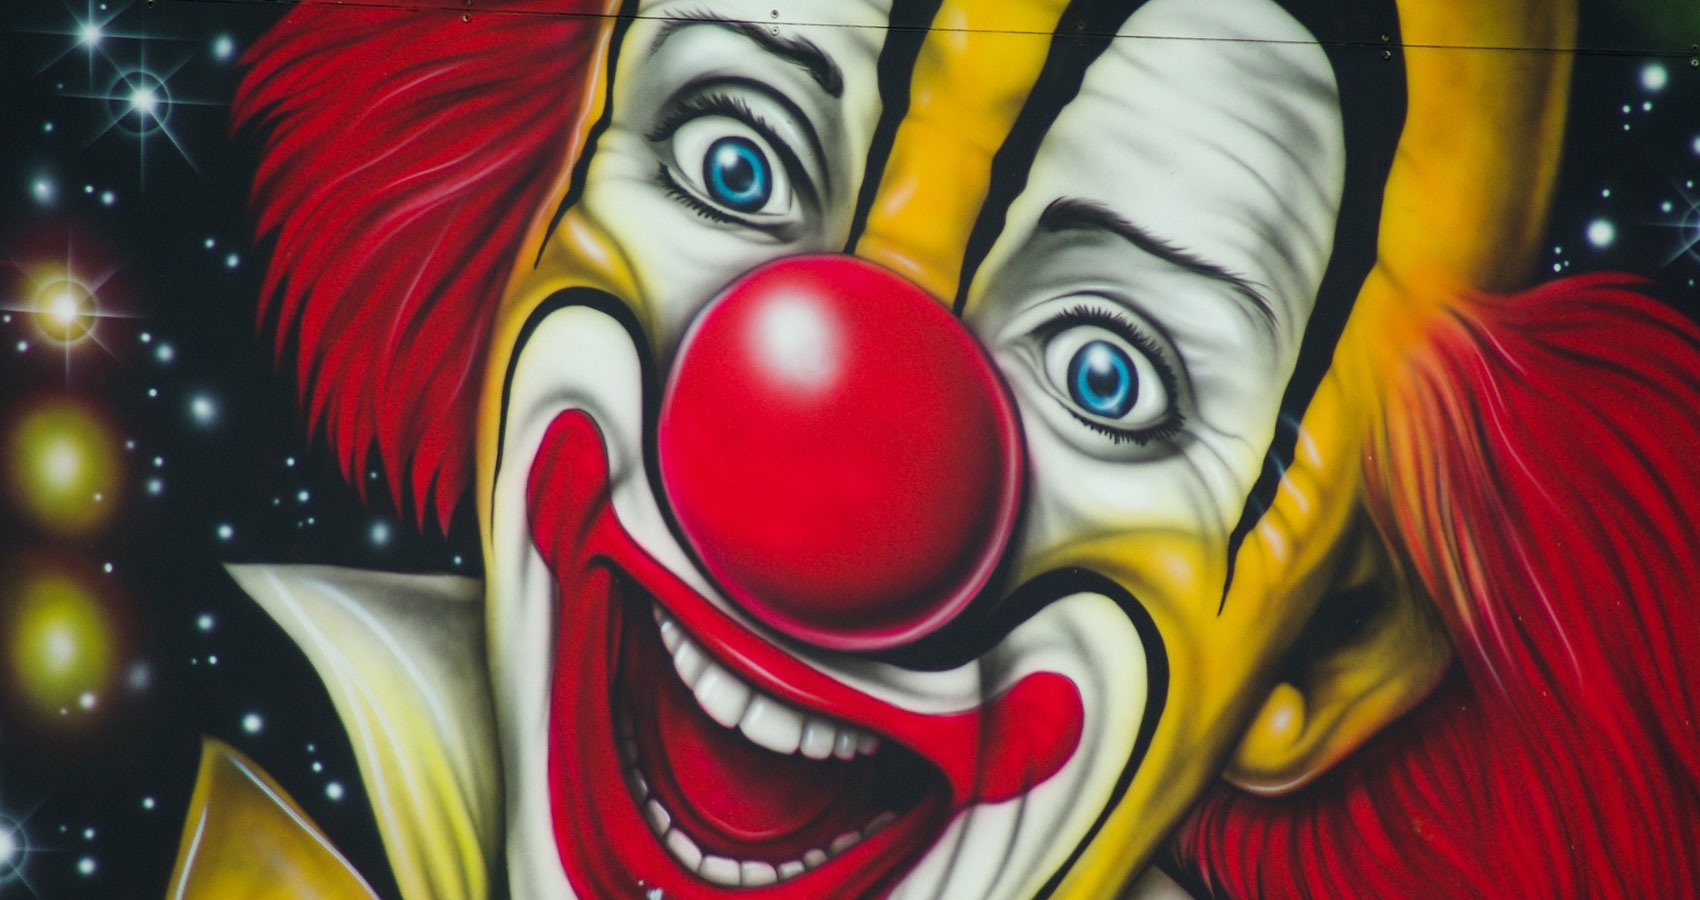 Bring On The Clowns!, poetry by Donna Africa at Spillwords.com